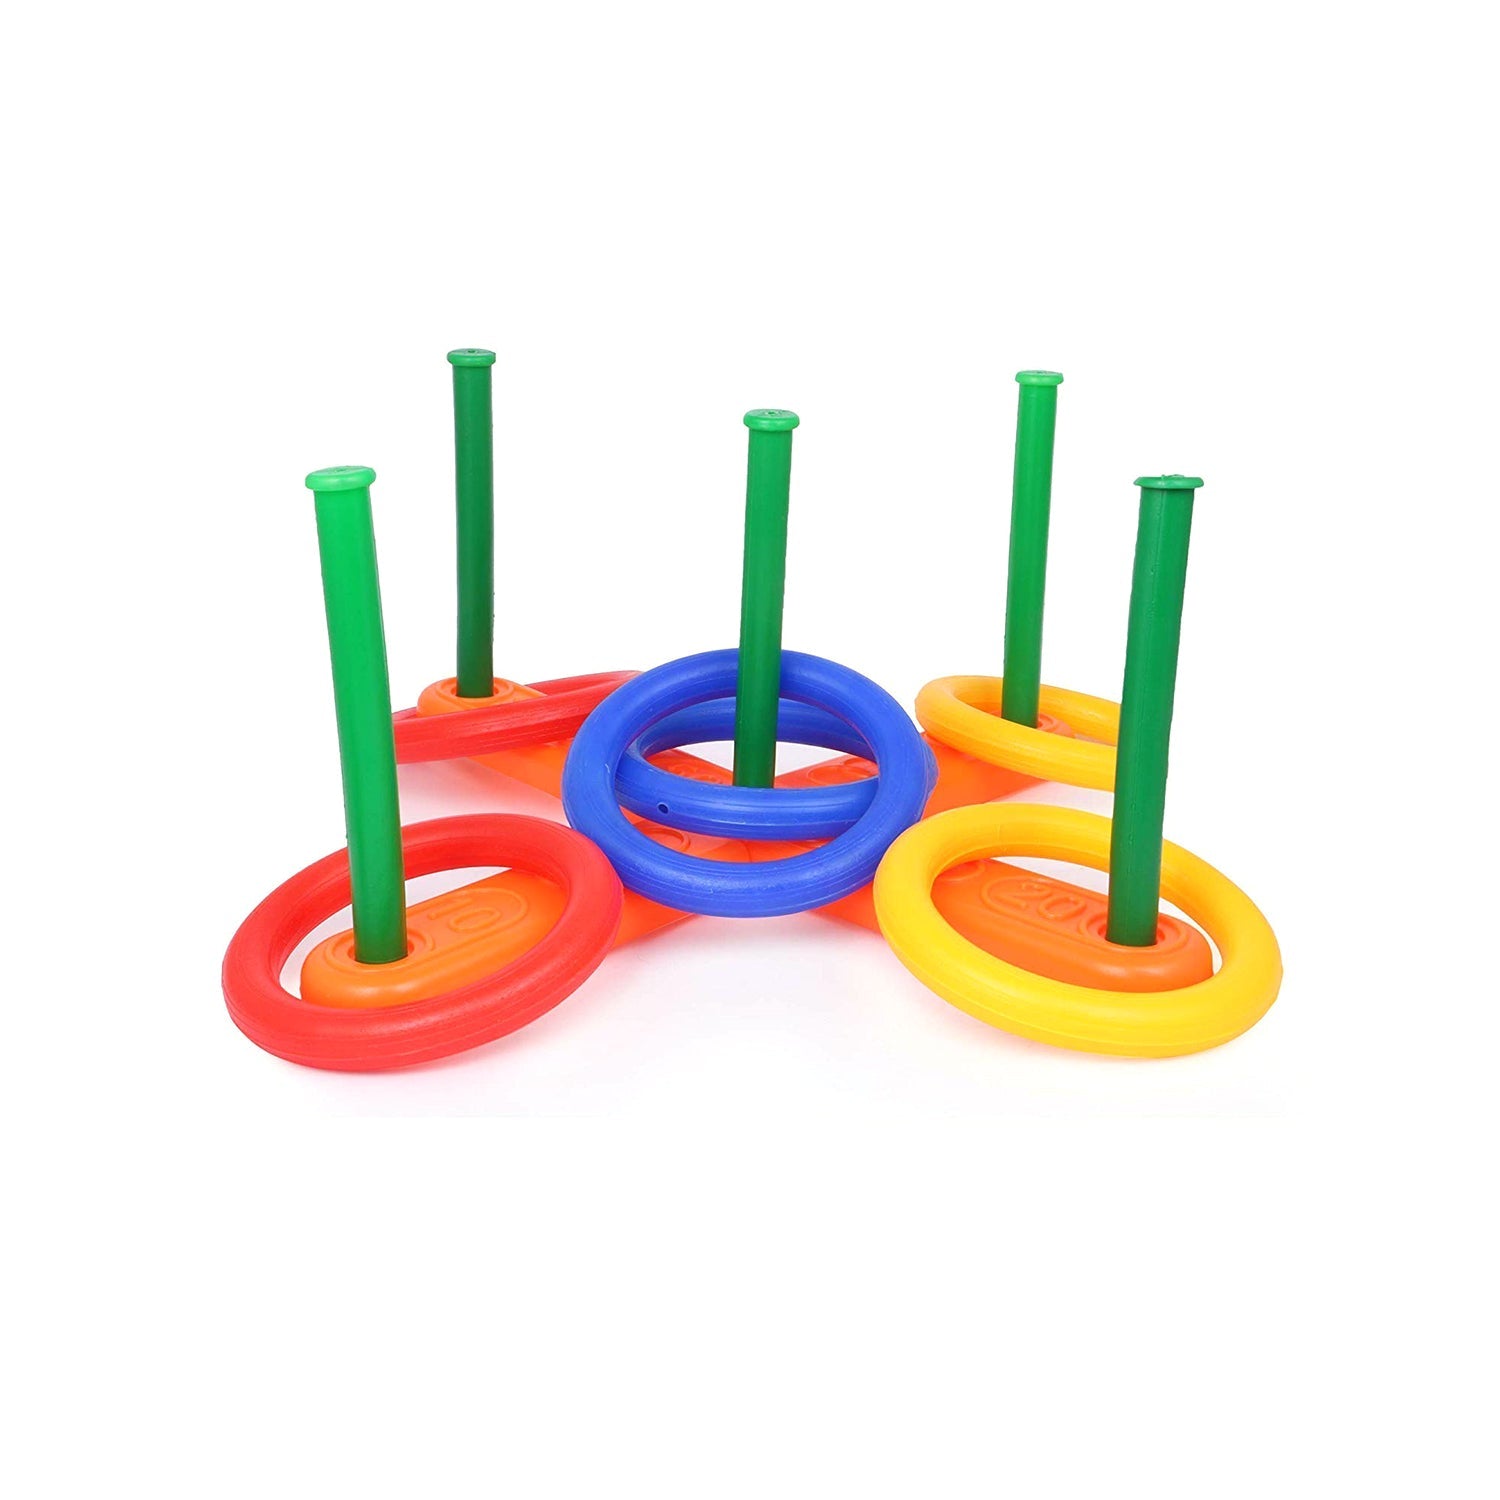 8078 13 Pc Ring Toss Game widely used by children’s and kids for playing and enjoying purposes and all in all kinds of household and official places etc.